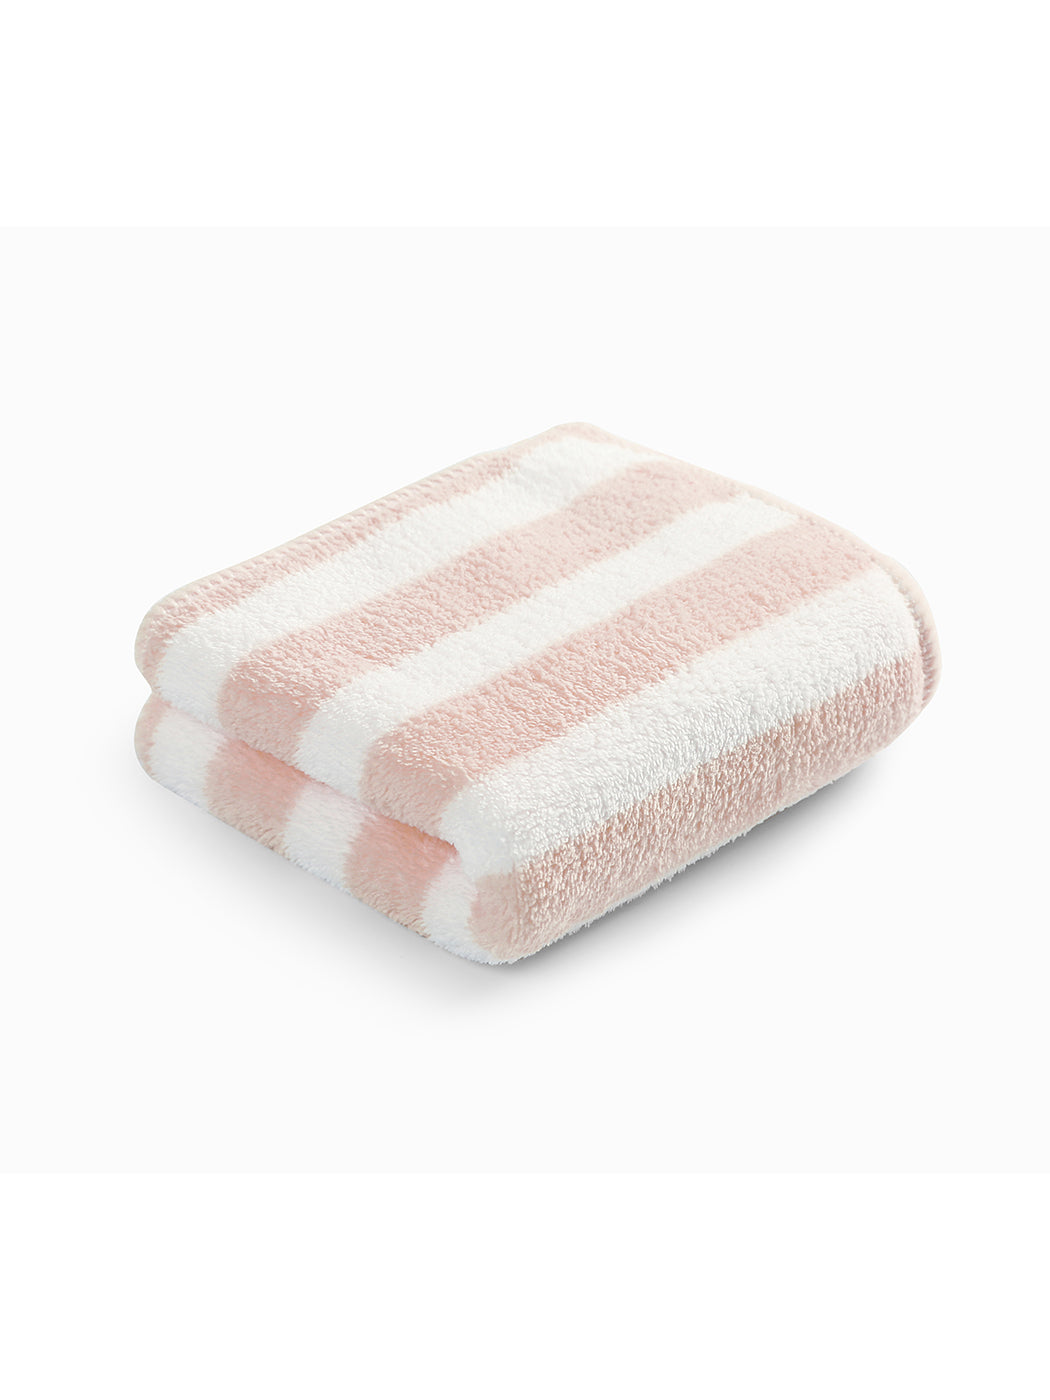 MINISO STRIPED CORAL FLEECE FACE TOWEL FOR KIDS (PINK) 2011443910106 TOWEL